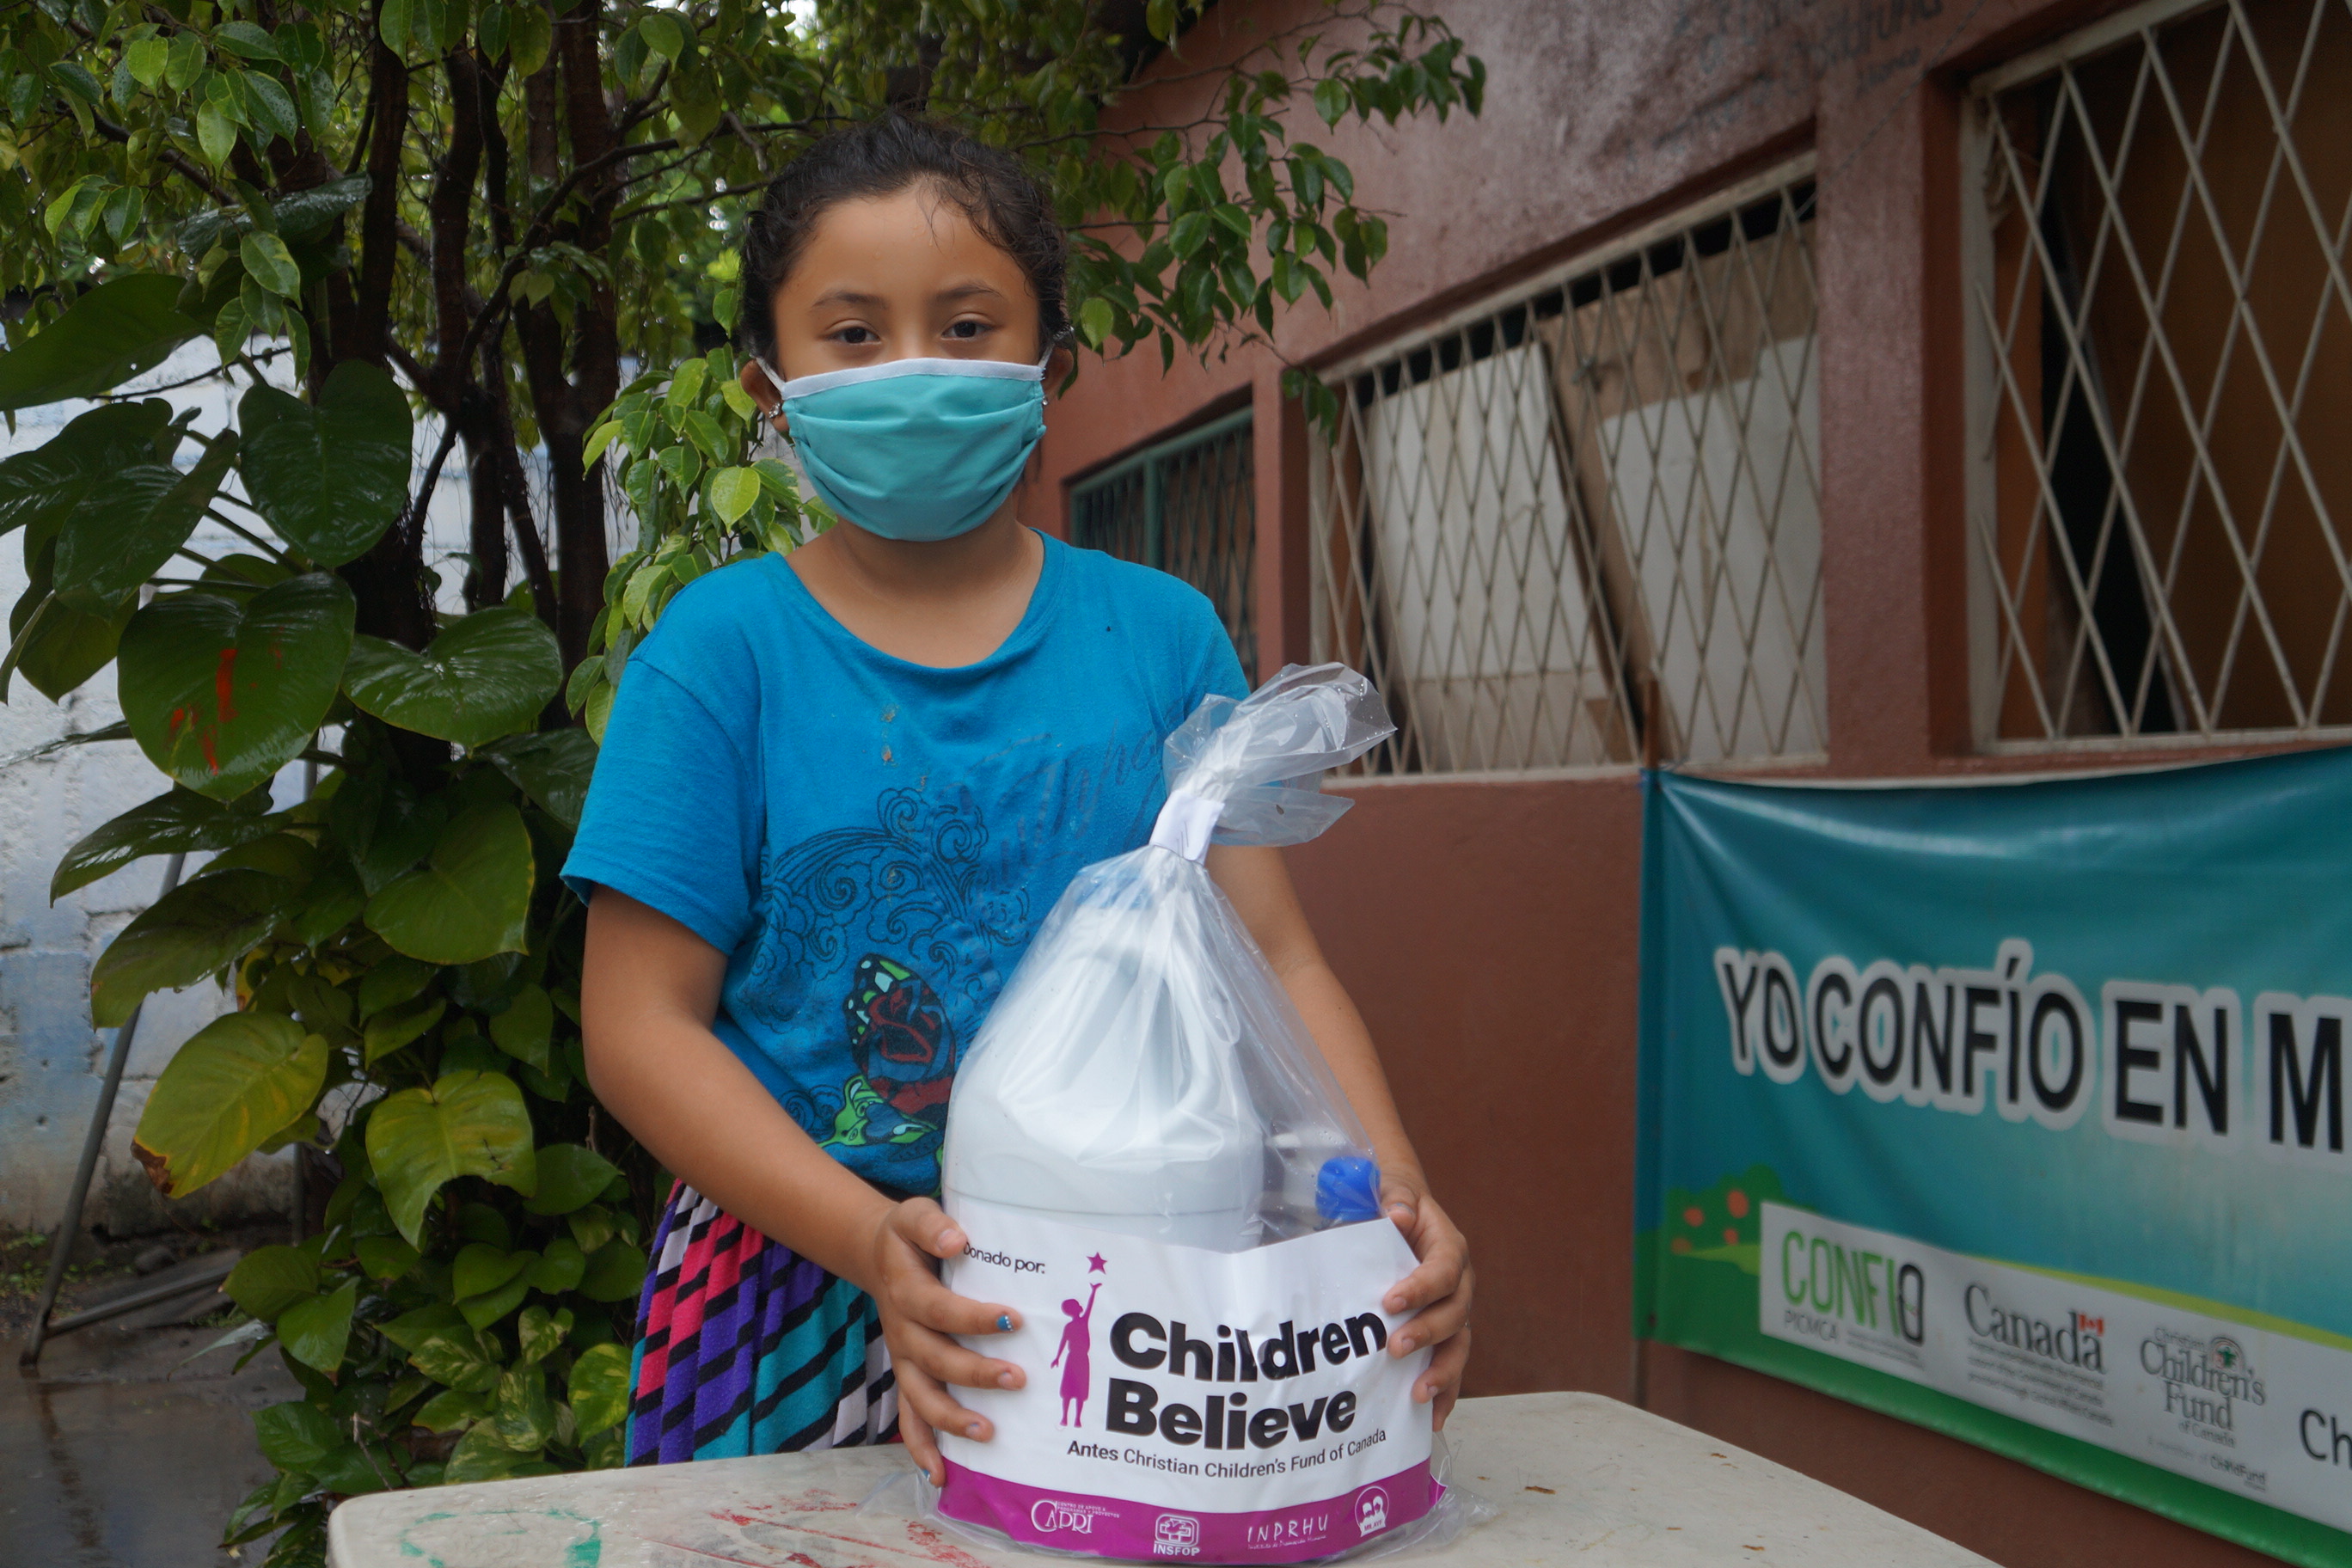 Through Children Believe, this youth in Nicaragua received a hygiene kit and information to help her family avoid spread of COVID-19. 